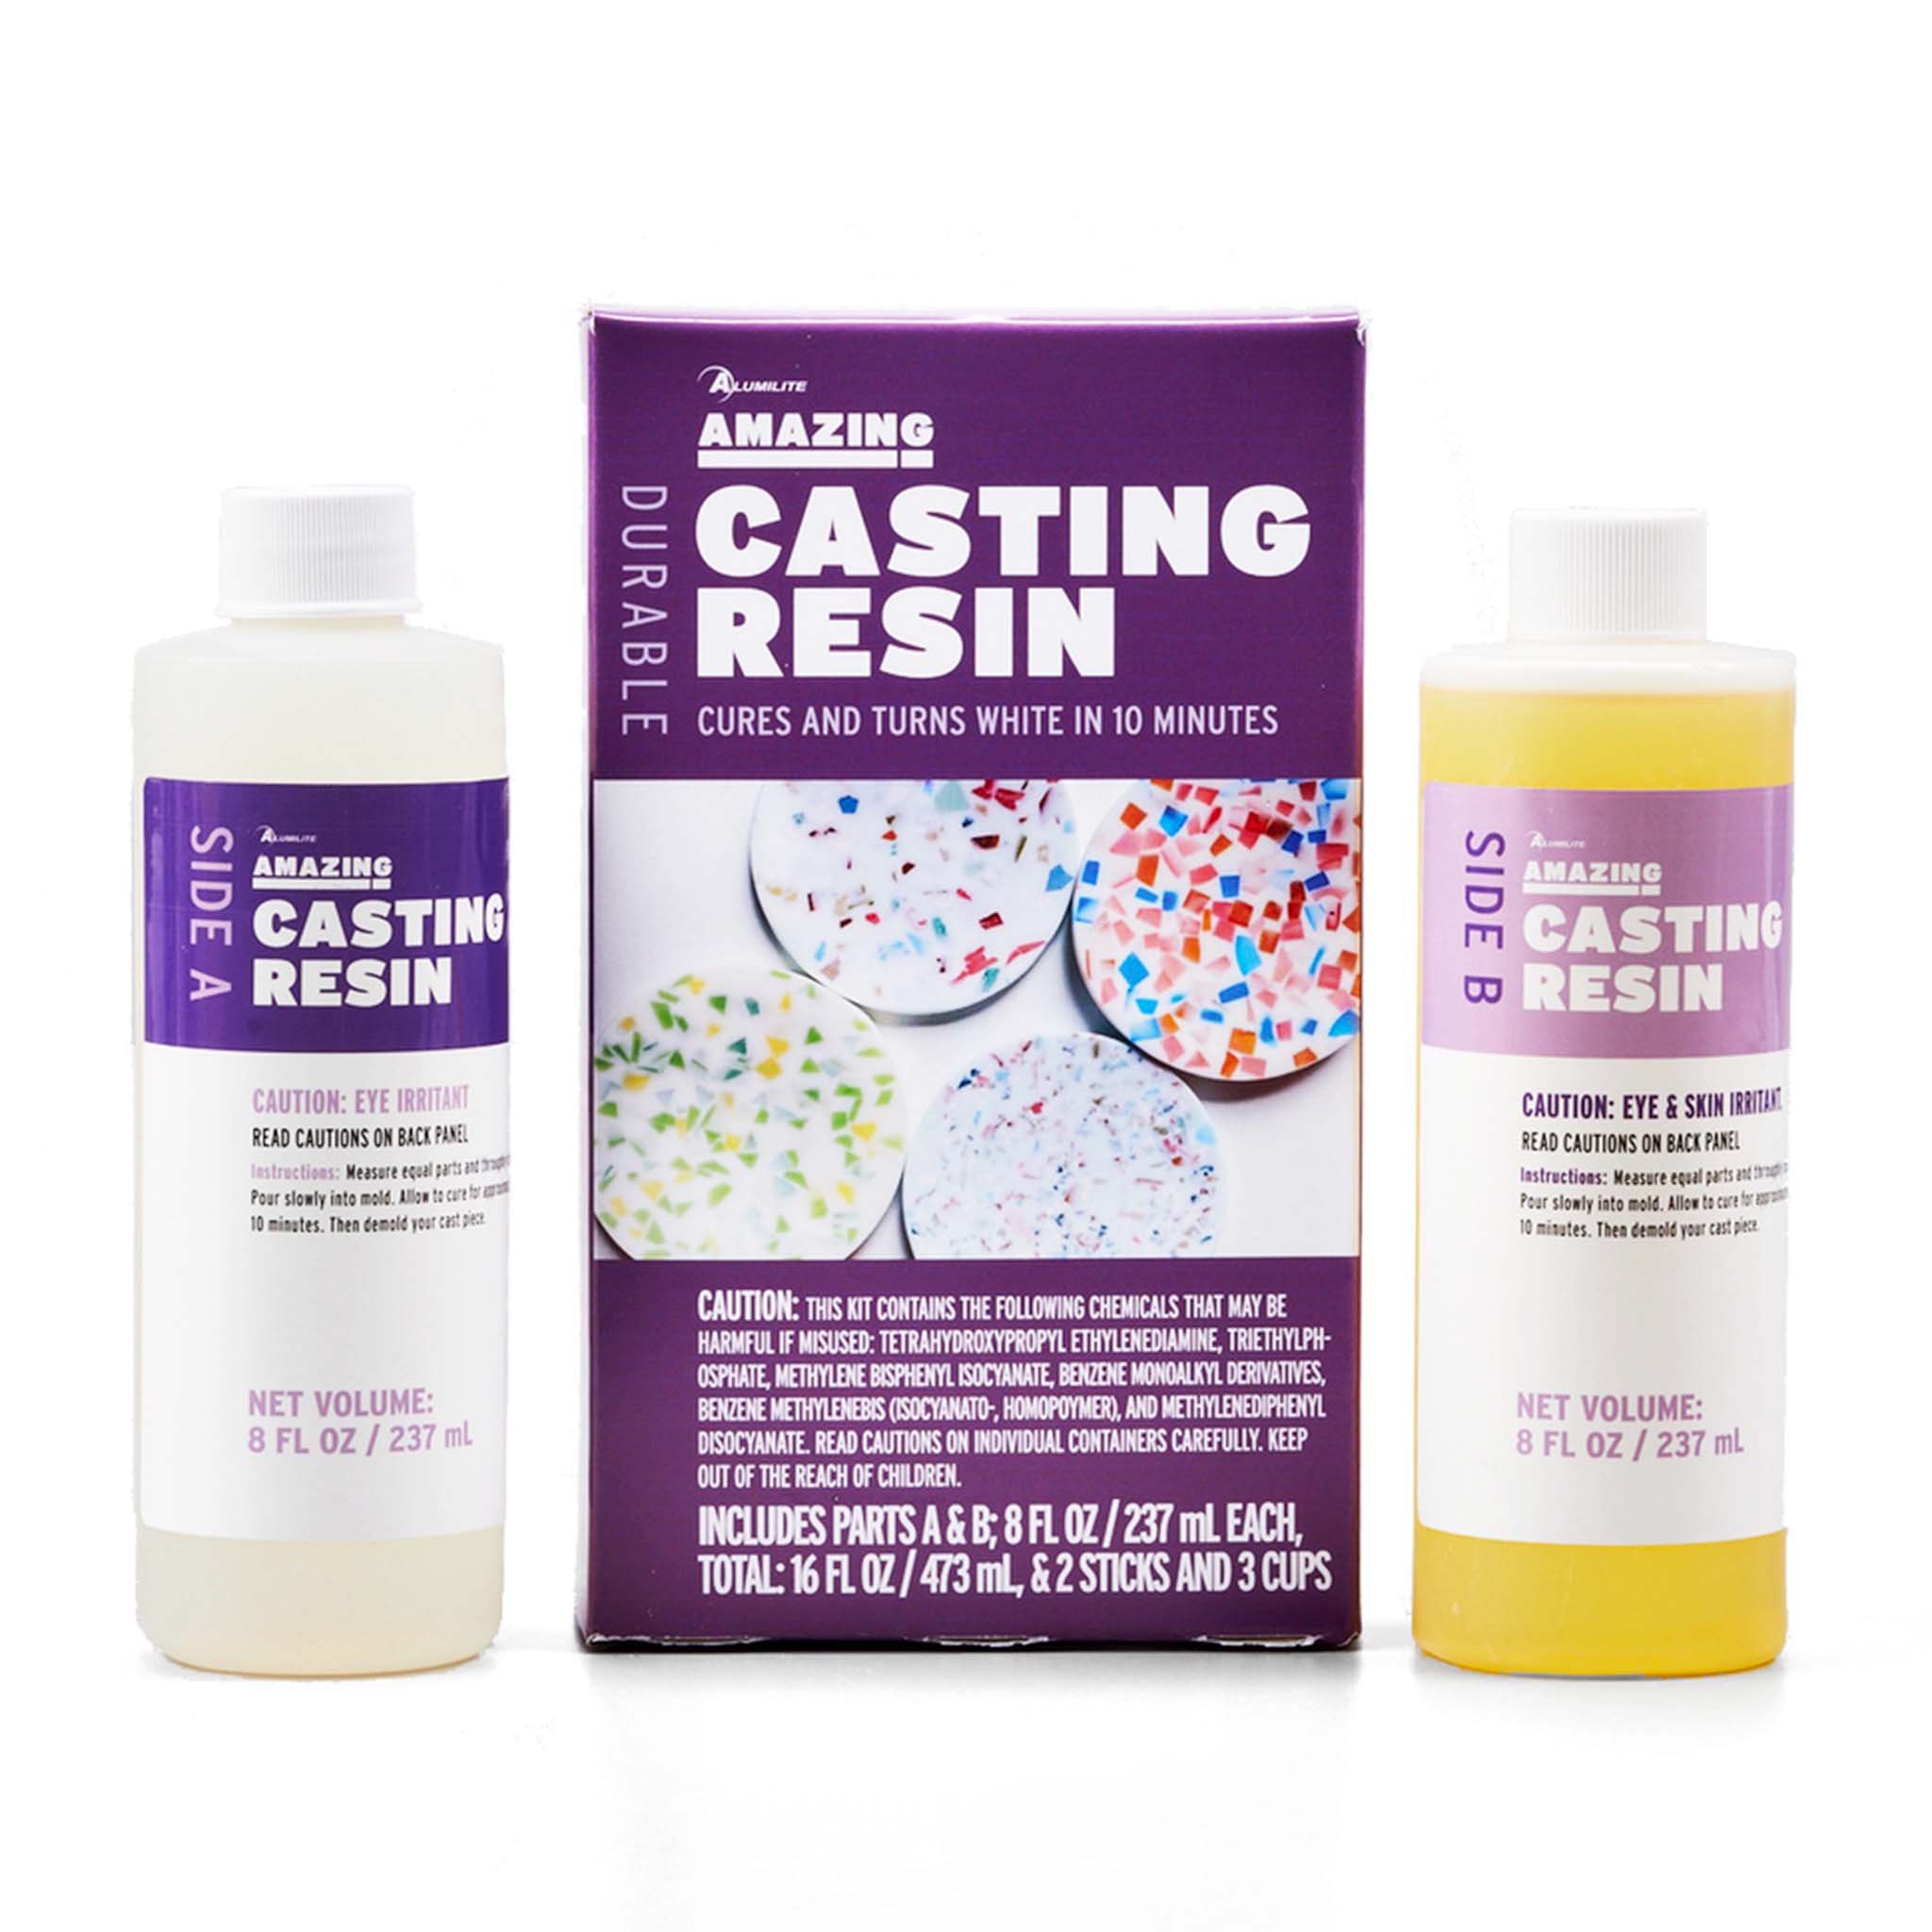 Amazing Casting Resin 10 Minutes Cures White 16Oz. Kit